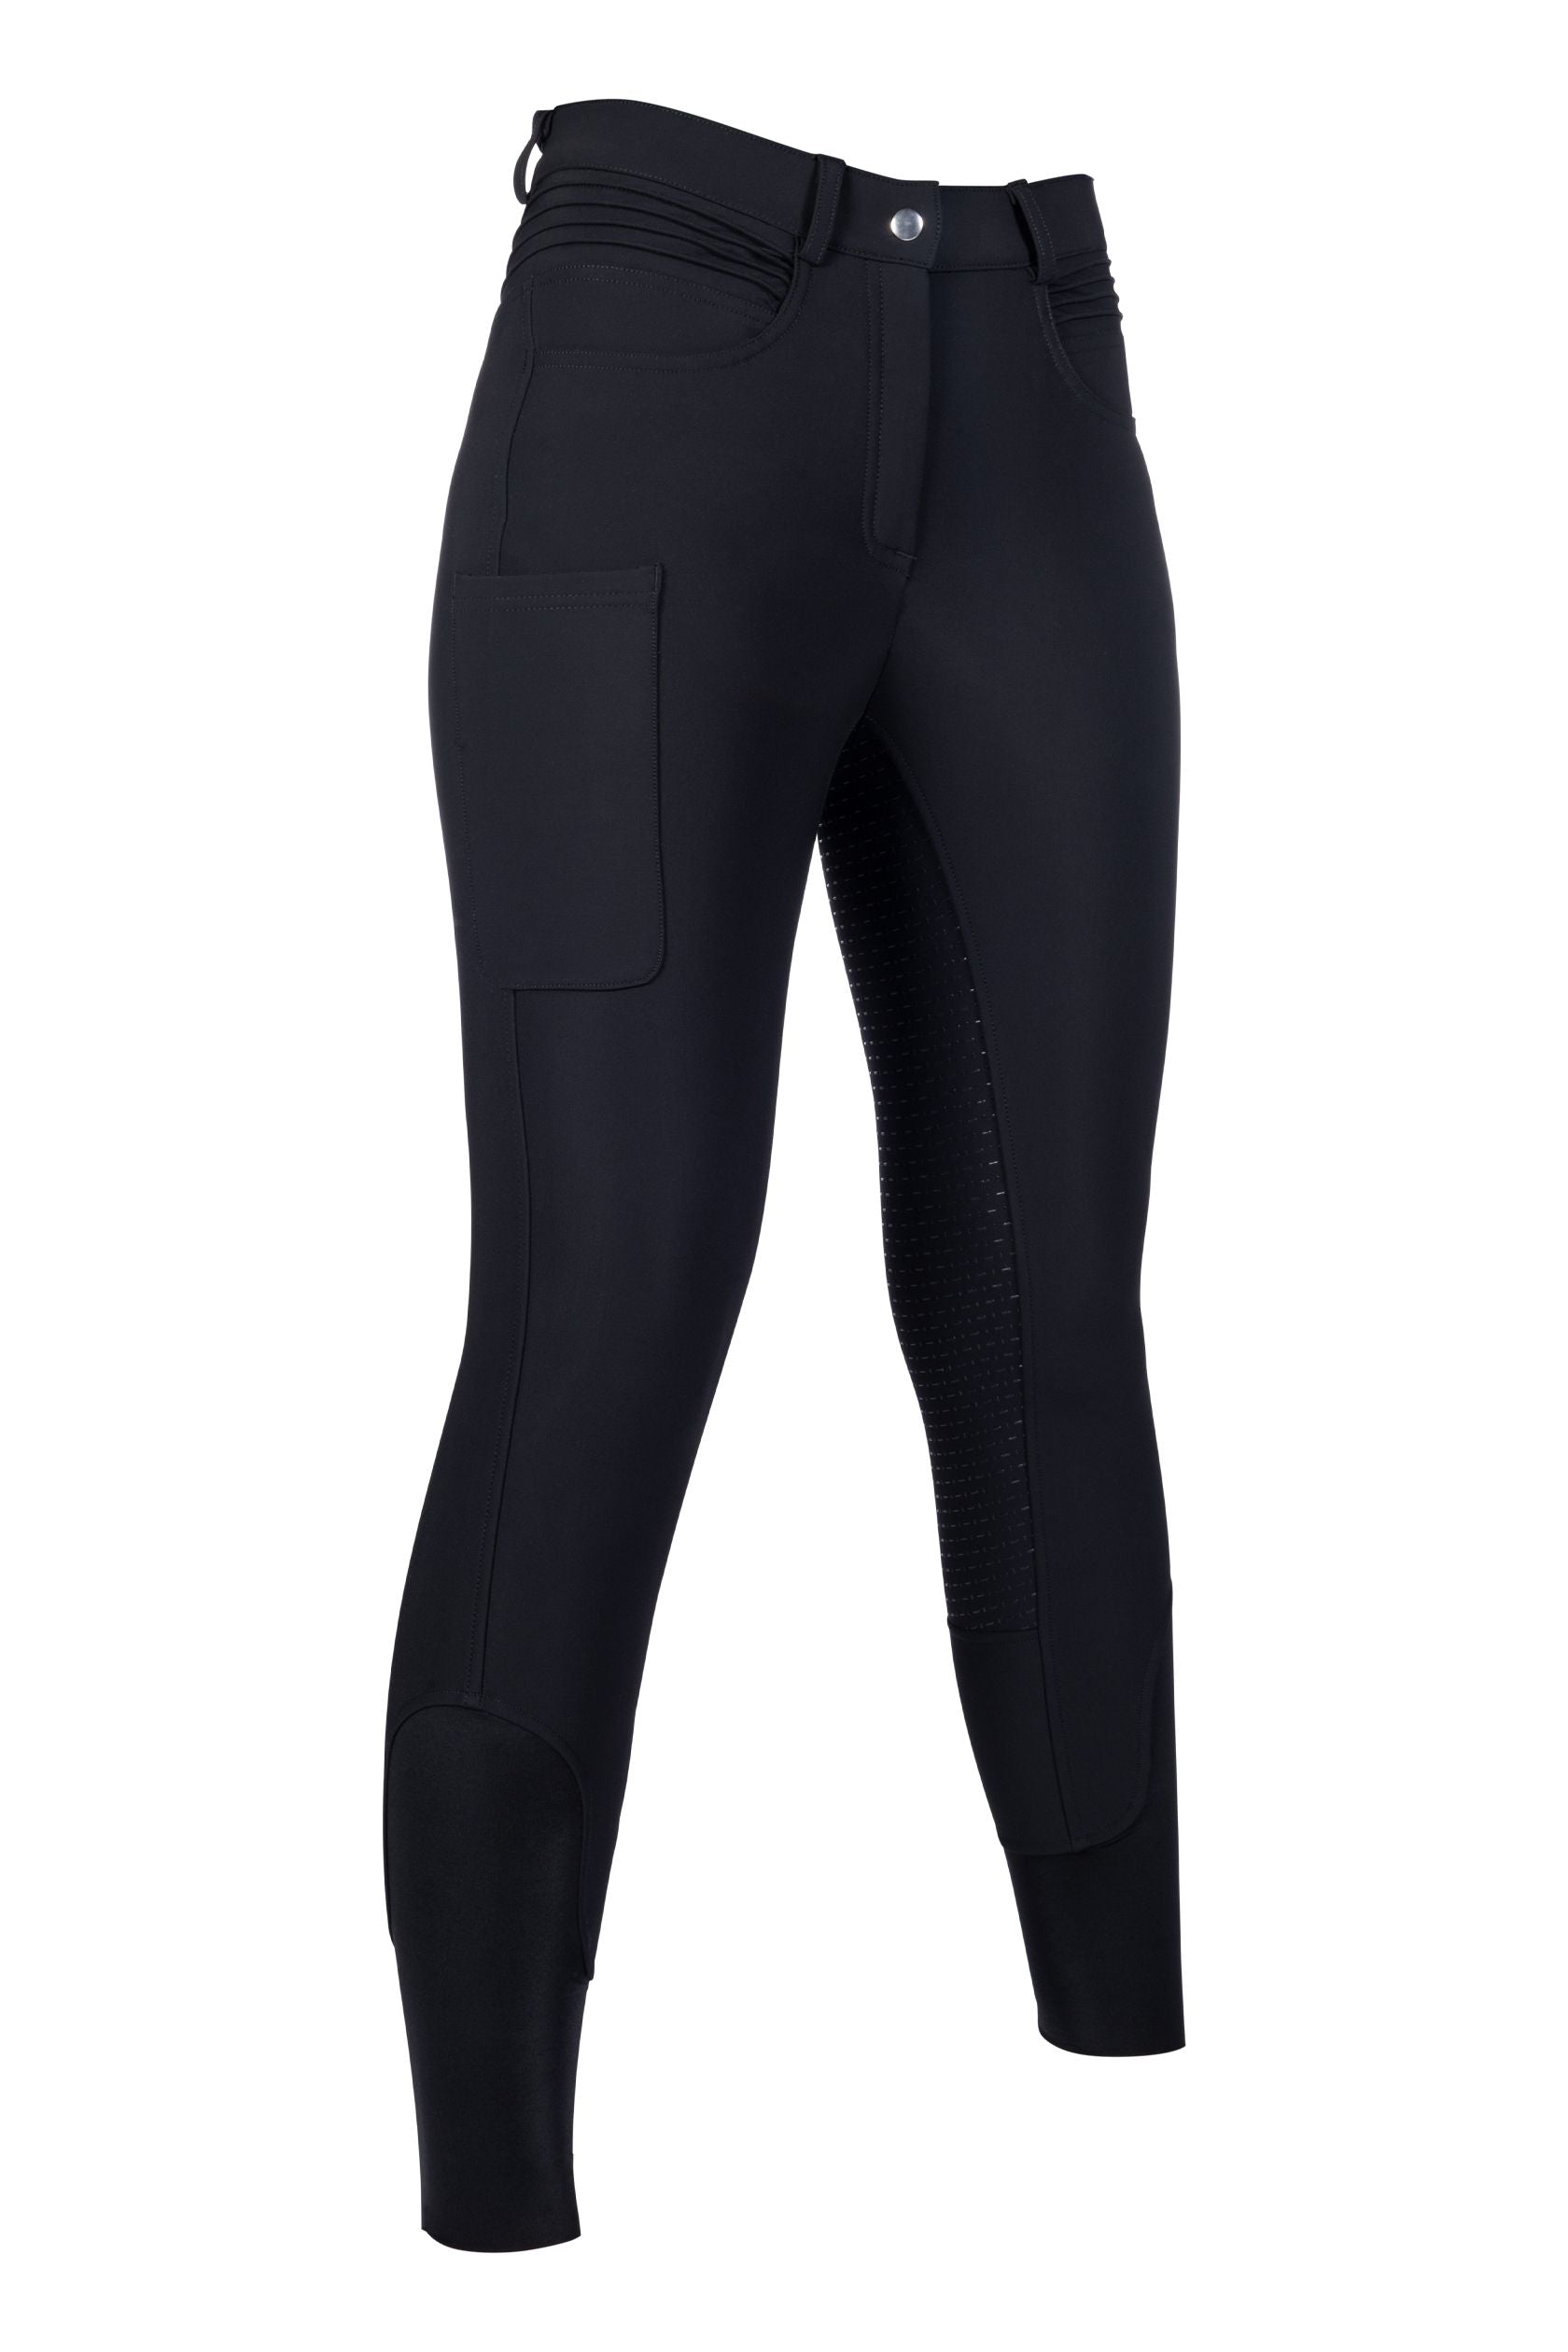 Women's Riding Breeches  EquiZone Online – Page 6